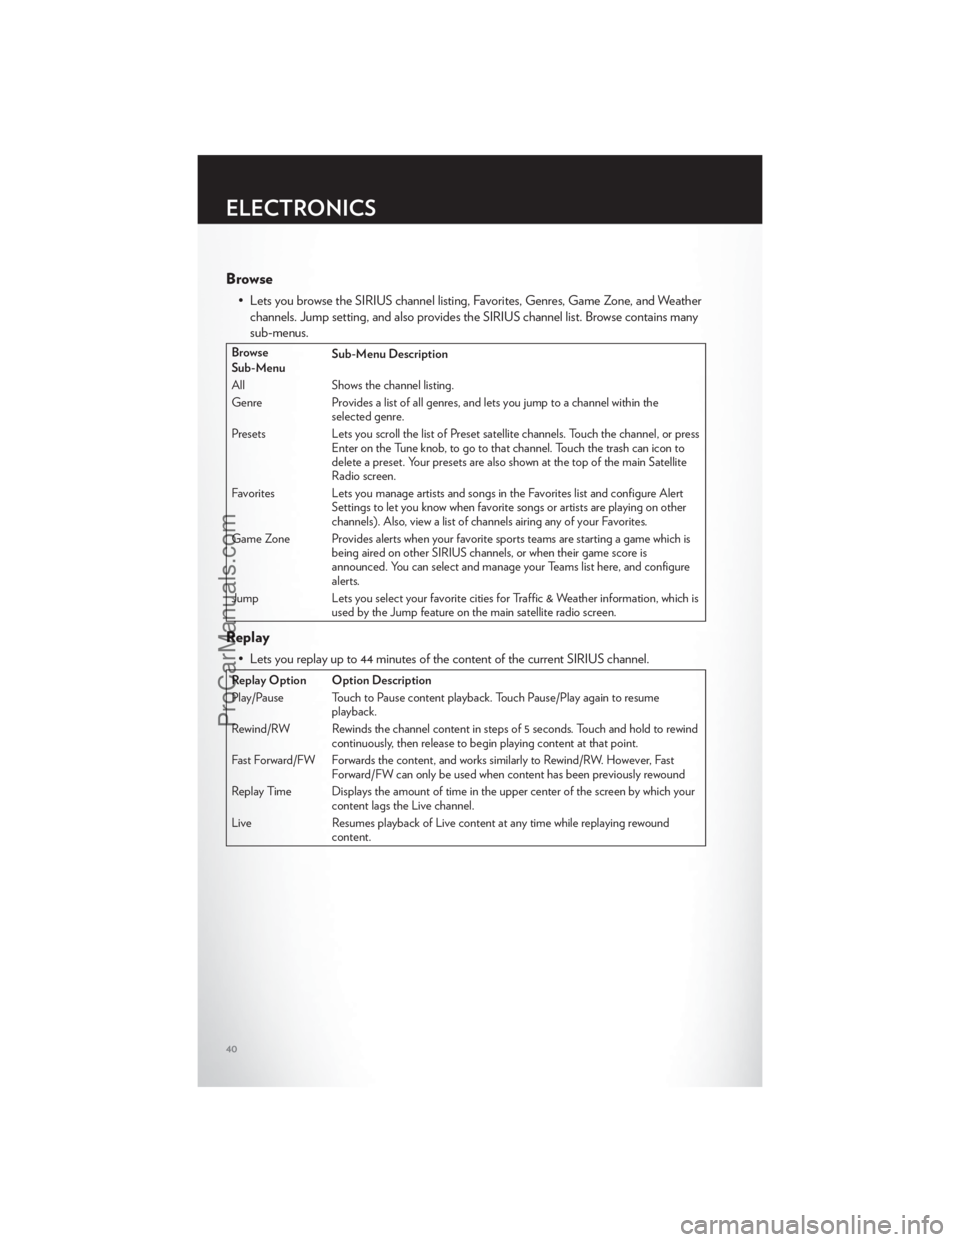 CHRYSLER 300 S 2012  Owners Manual Browse
• Lets you browse the SIRIUS channel listing, Favorites, Genres, Game Zone, and Weatherchannels. Jump setting, and also provides the SIRIUS channel list. Browse contains many
sub-menus.
Brows